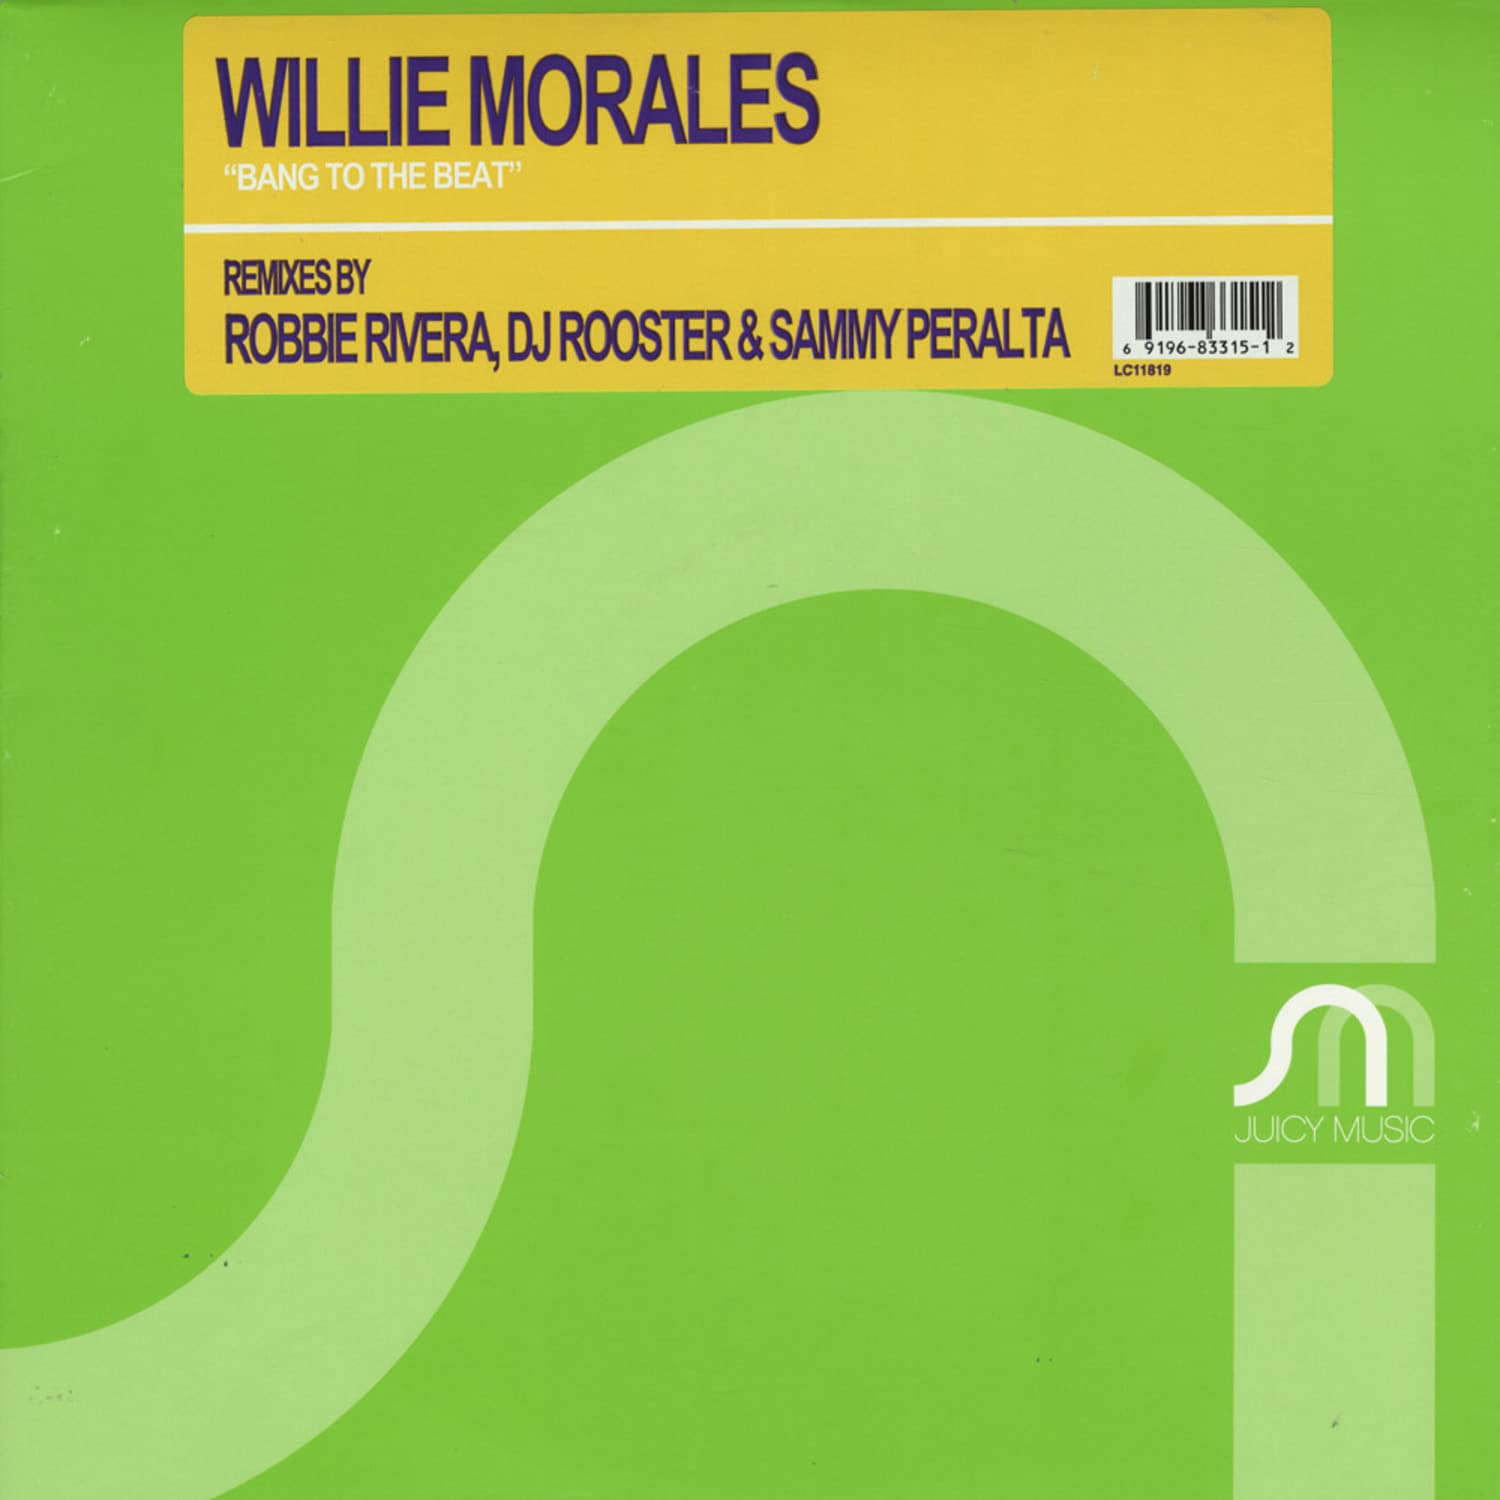 Willie Morales - BANG TO THE BEAT